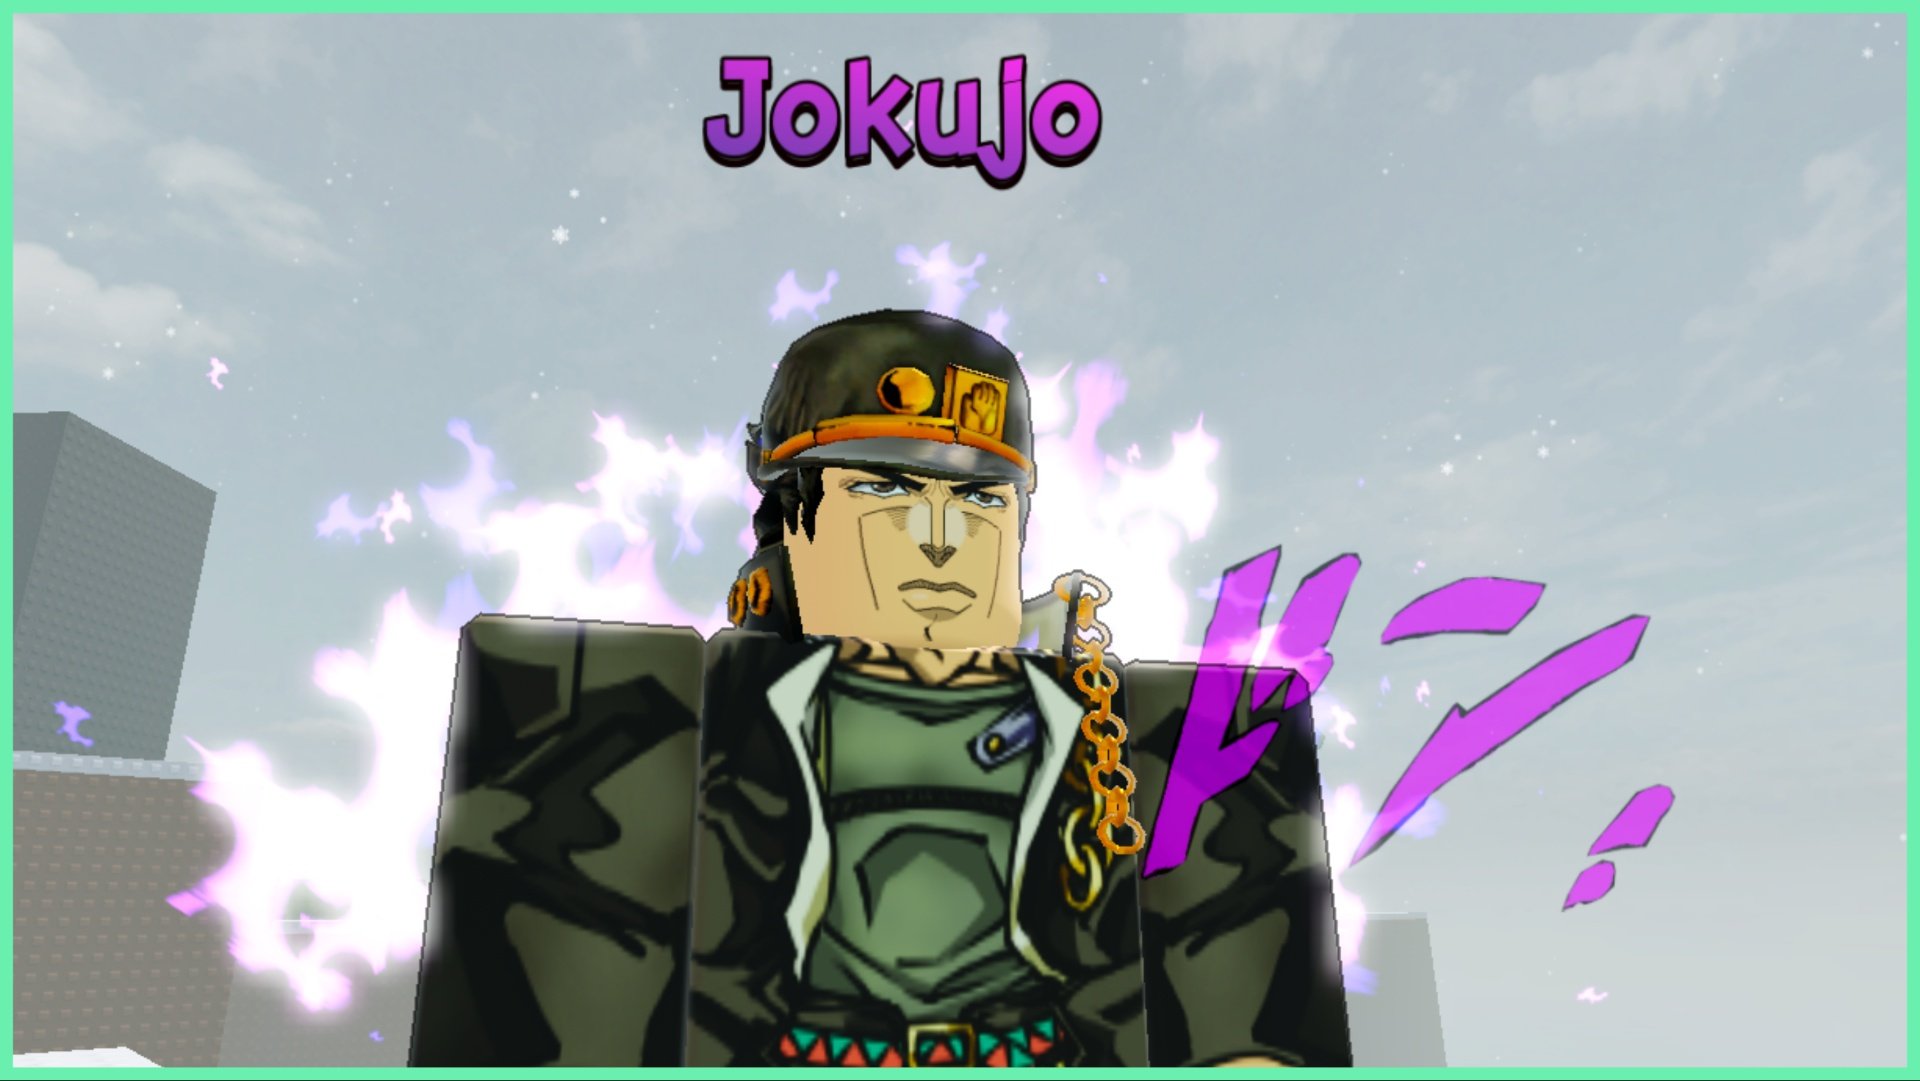 The image shows a close up face shot of Jotaro from JJBA in the Roblox art style. Purple japanese lettering is on his shoulder. Behind him is all white snowy weather